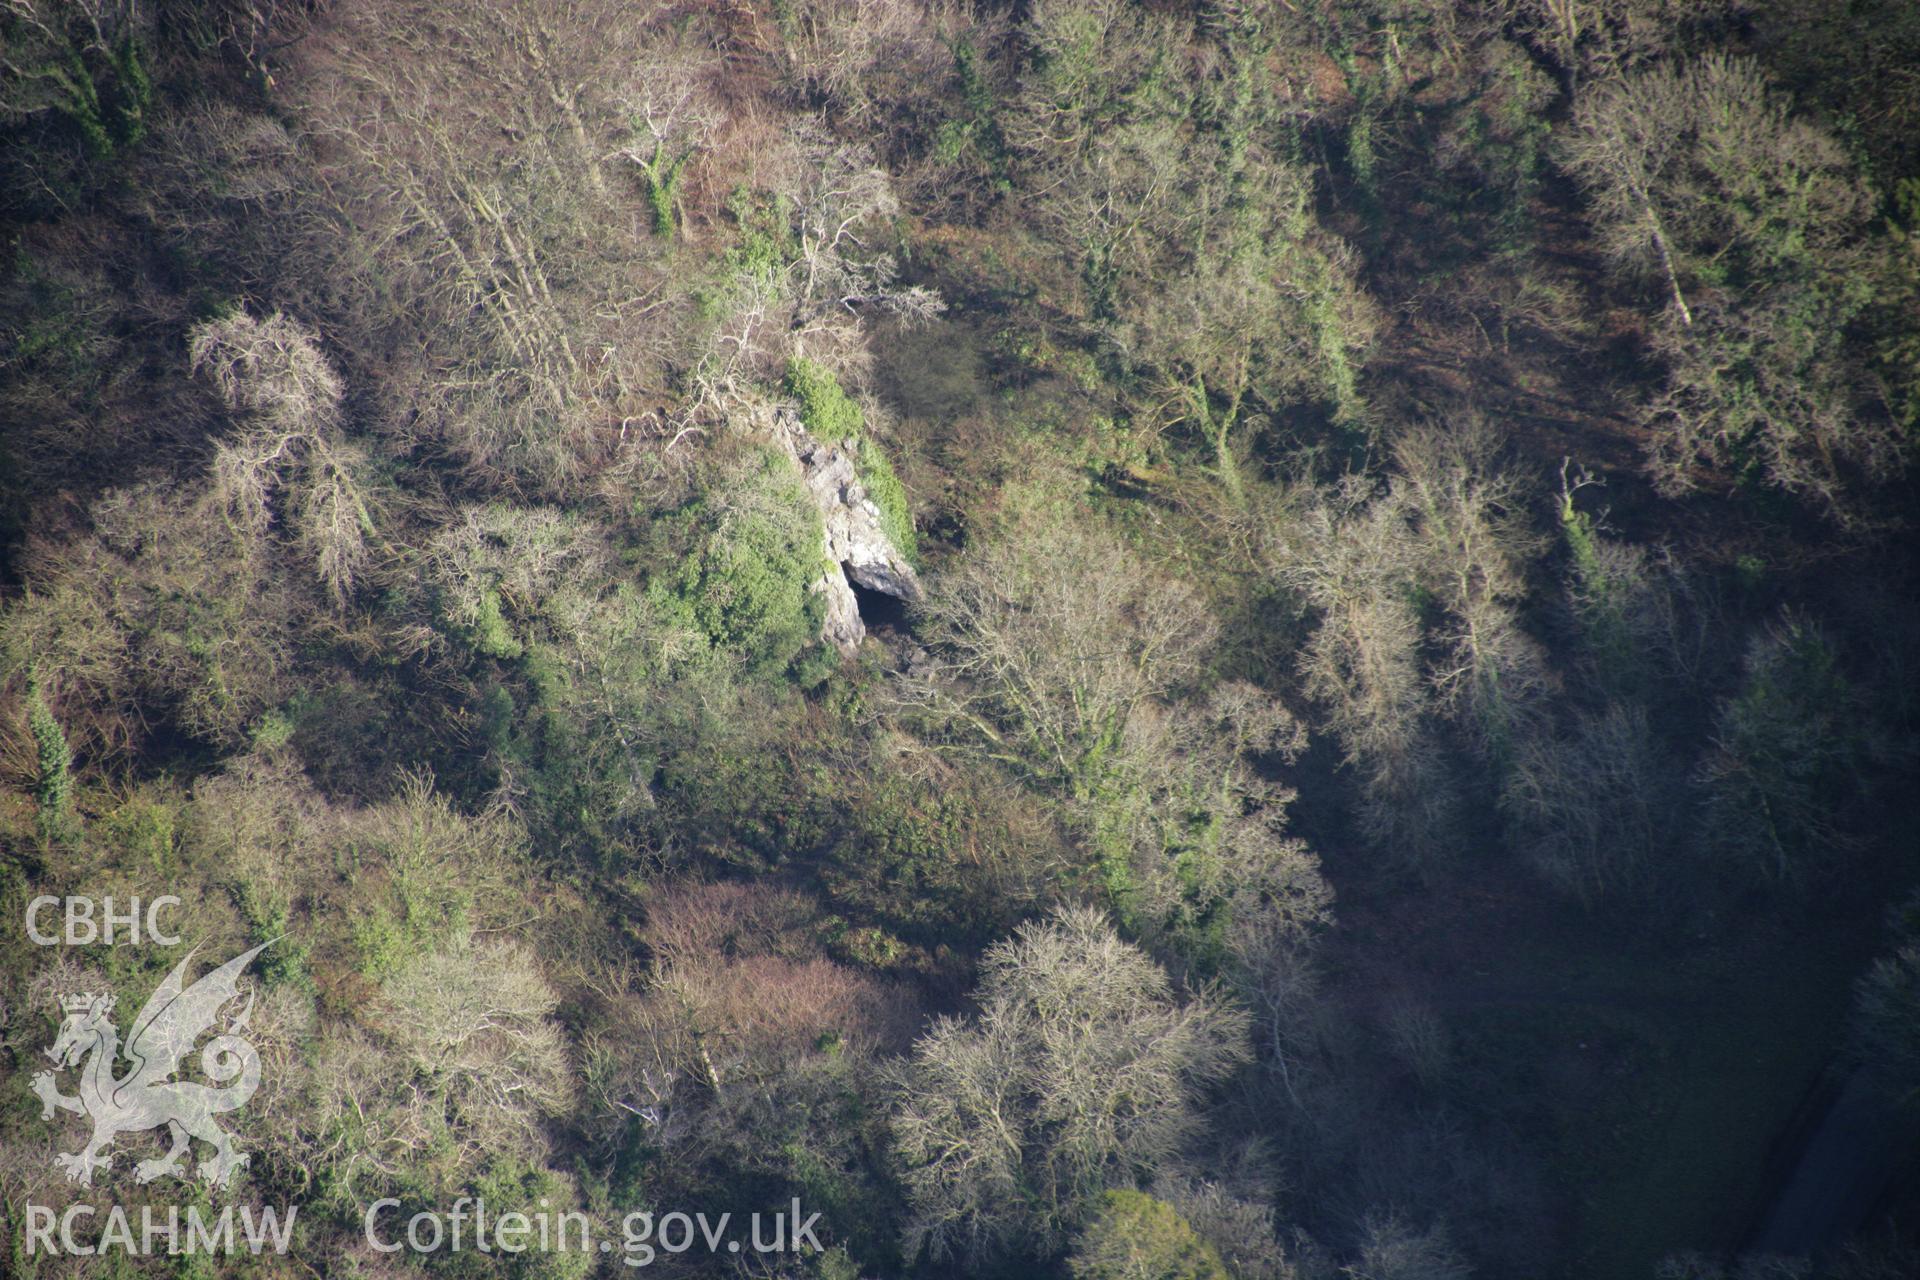 RCAHMW colour oblique aerial photograph of Cat Hole Cave, Parkmill, from the north-west. Taken on 26 January 2006 by Toby Driver.